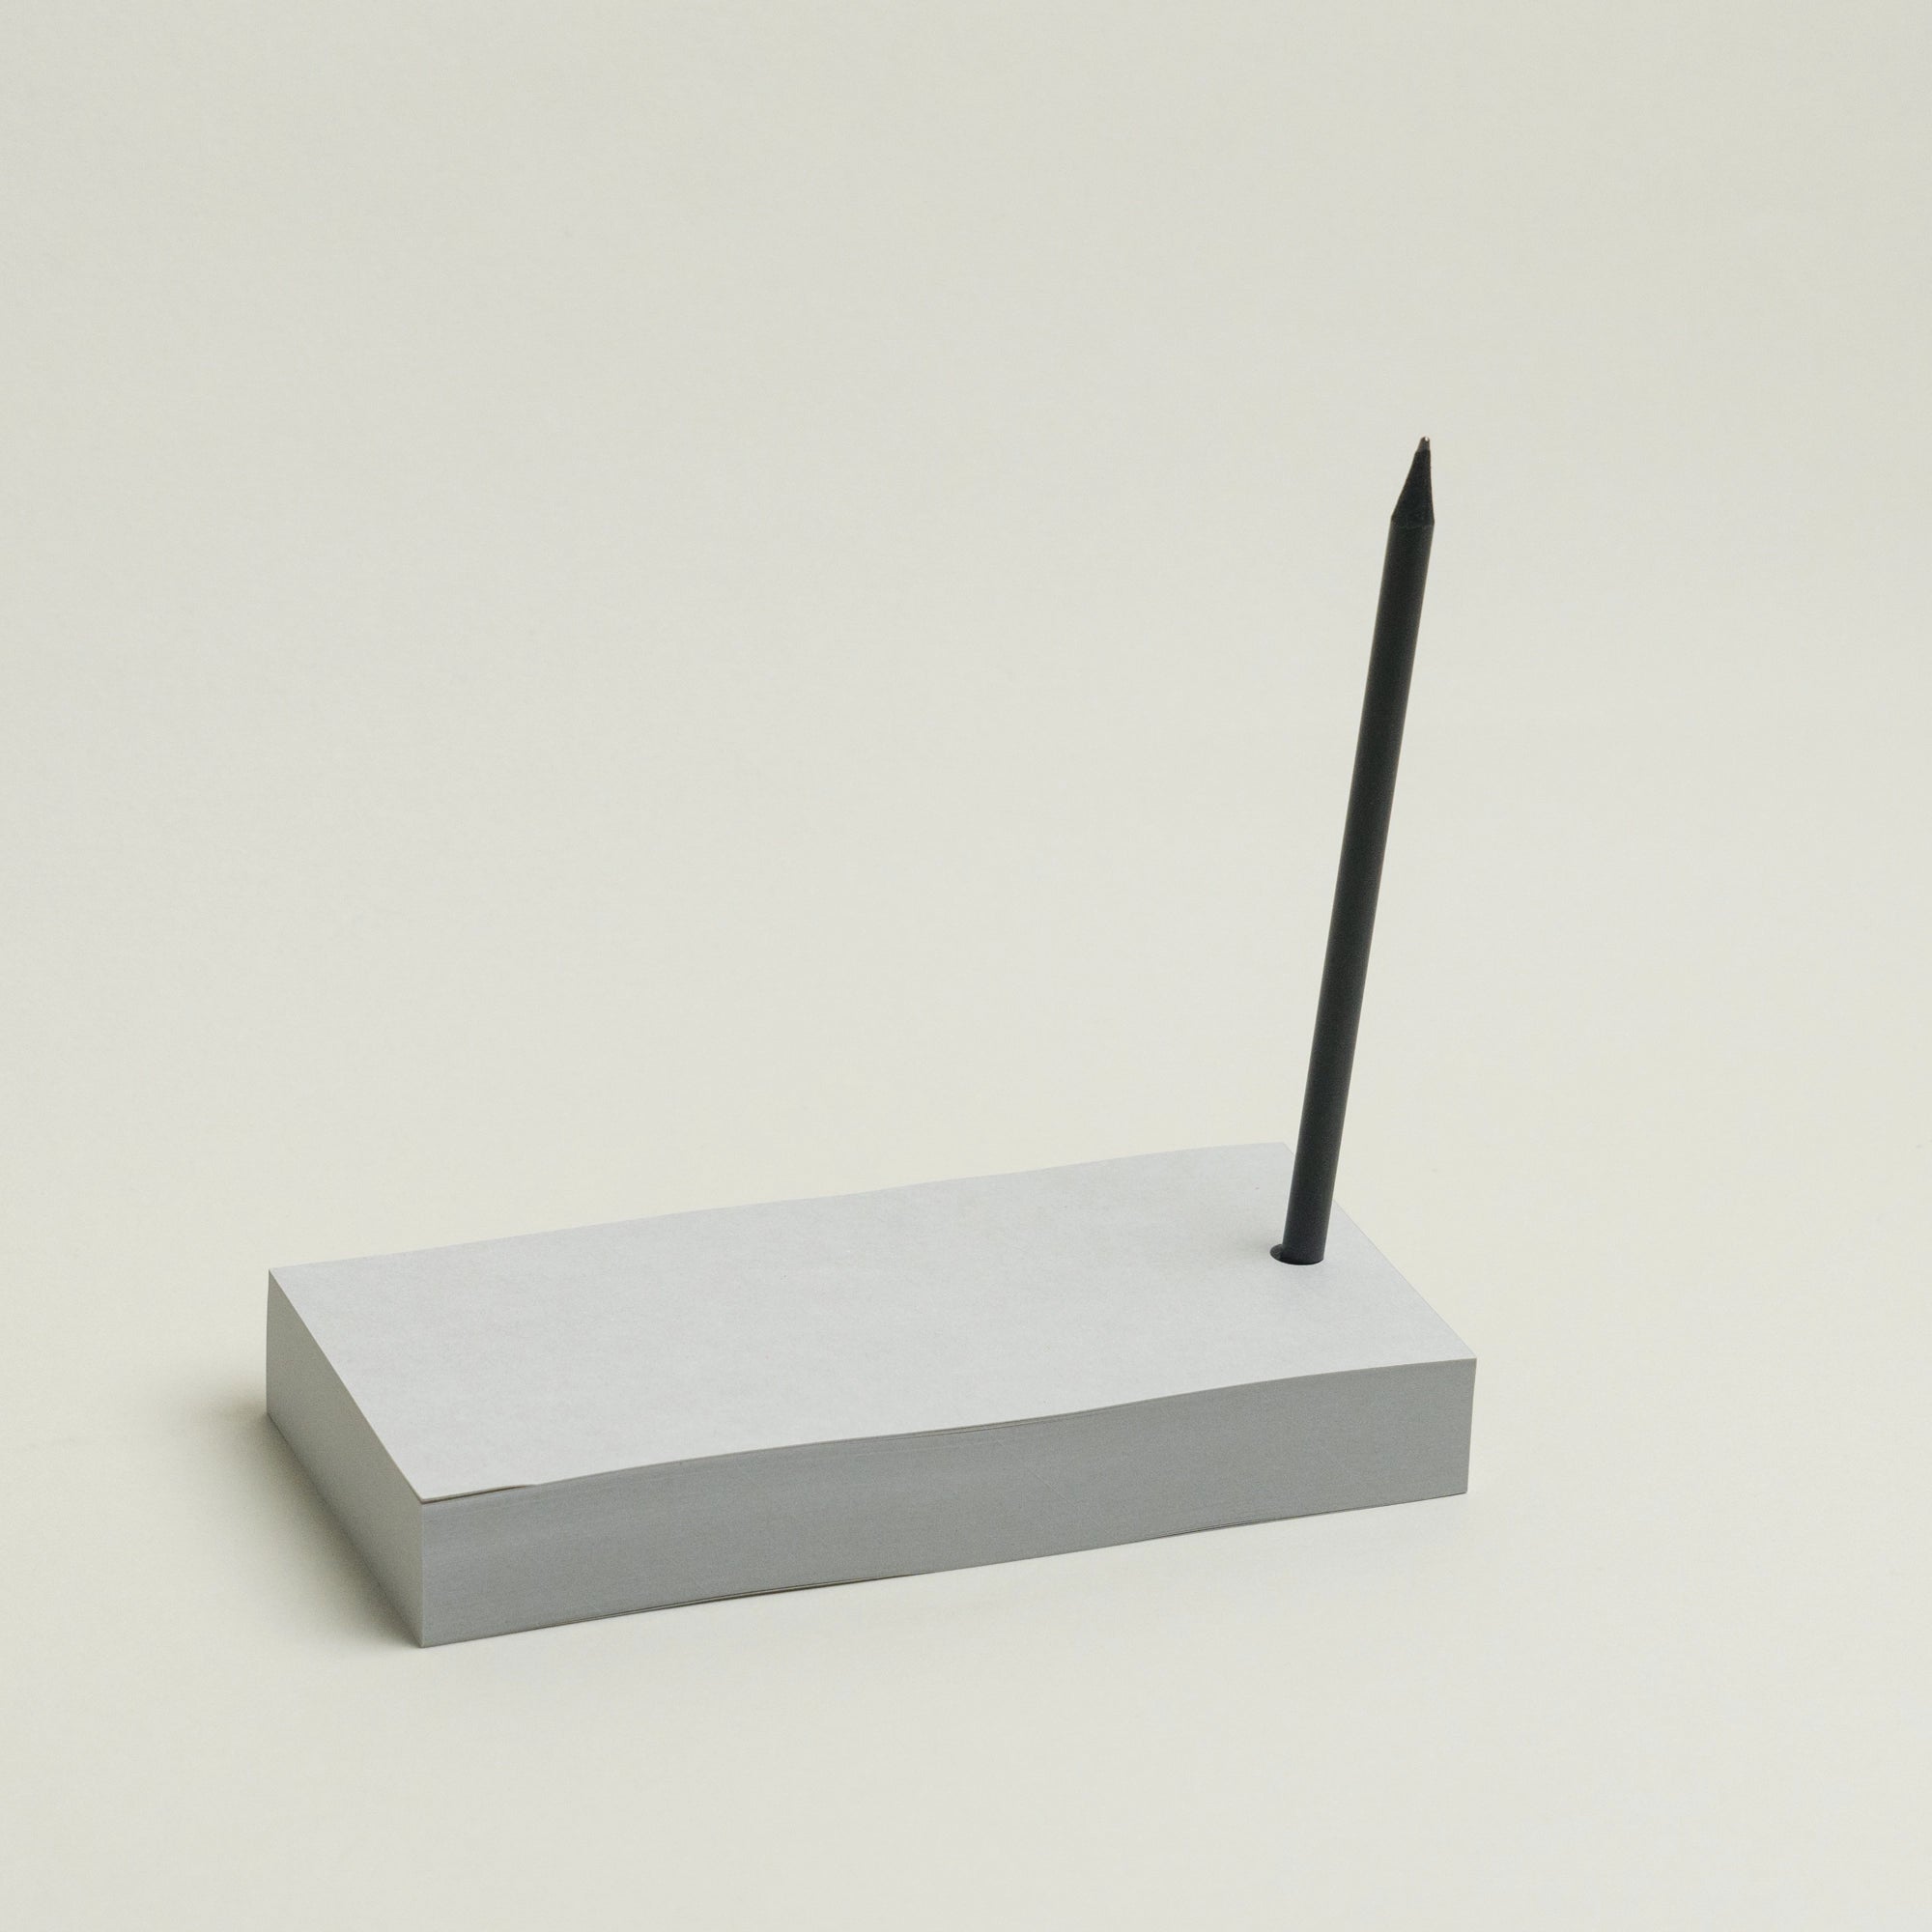 Penstand Notepad